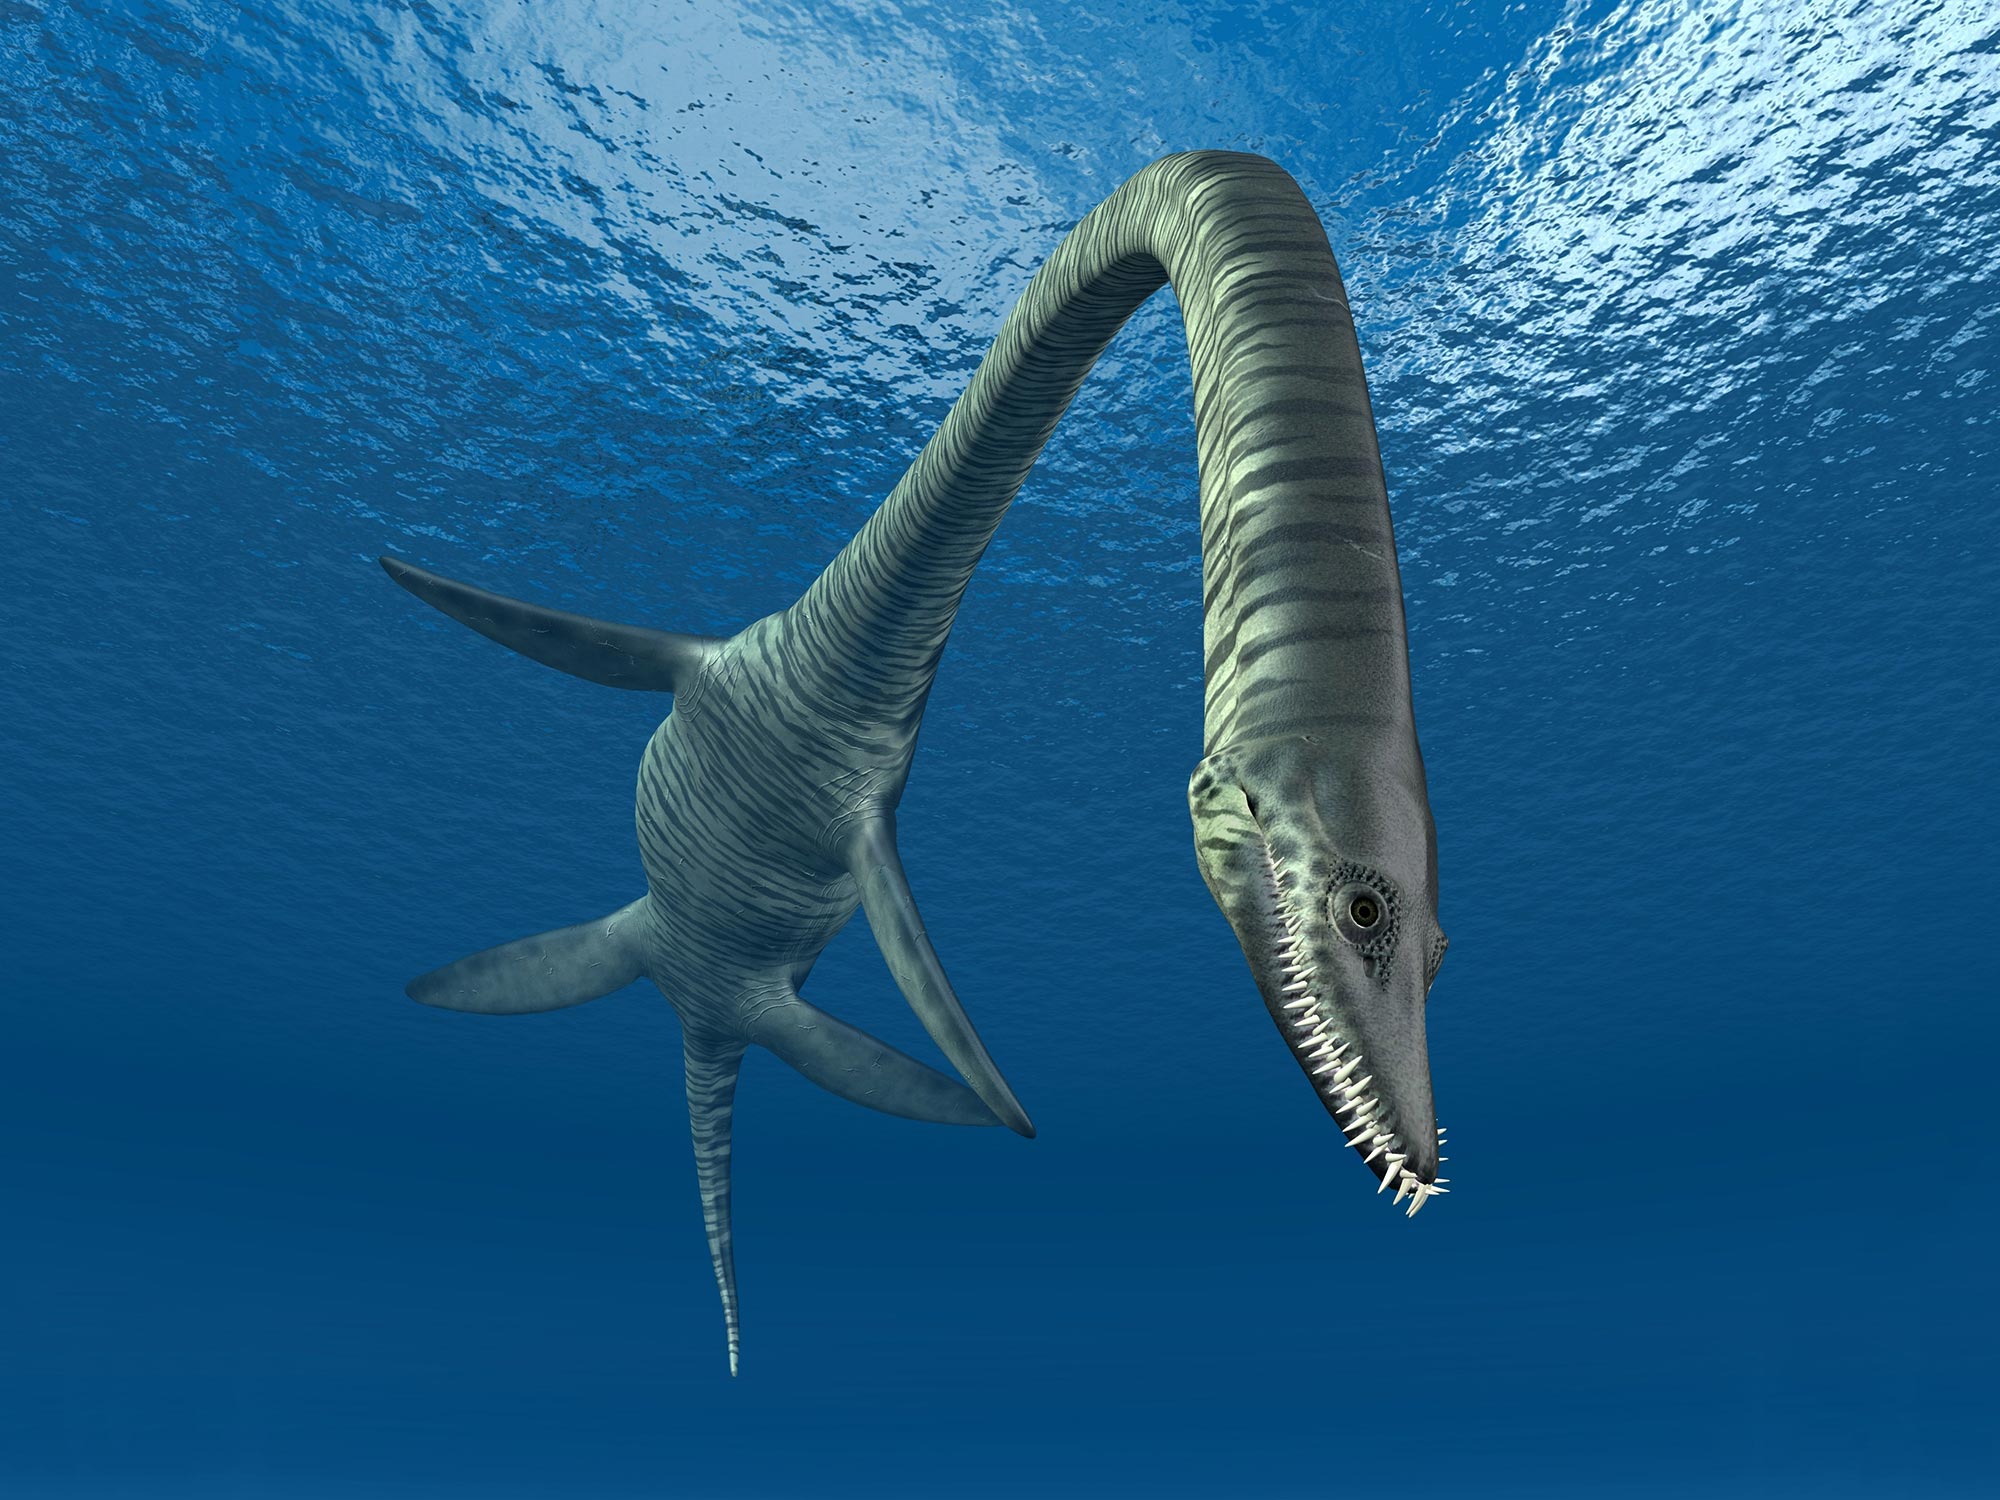 Plesiosaurs doubled their neck length by acquiring new vertebrae